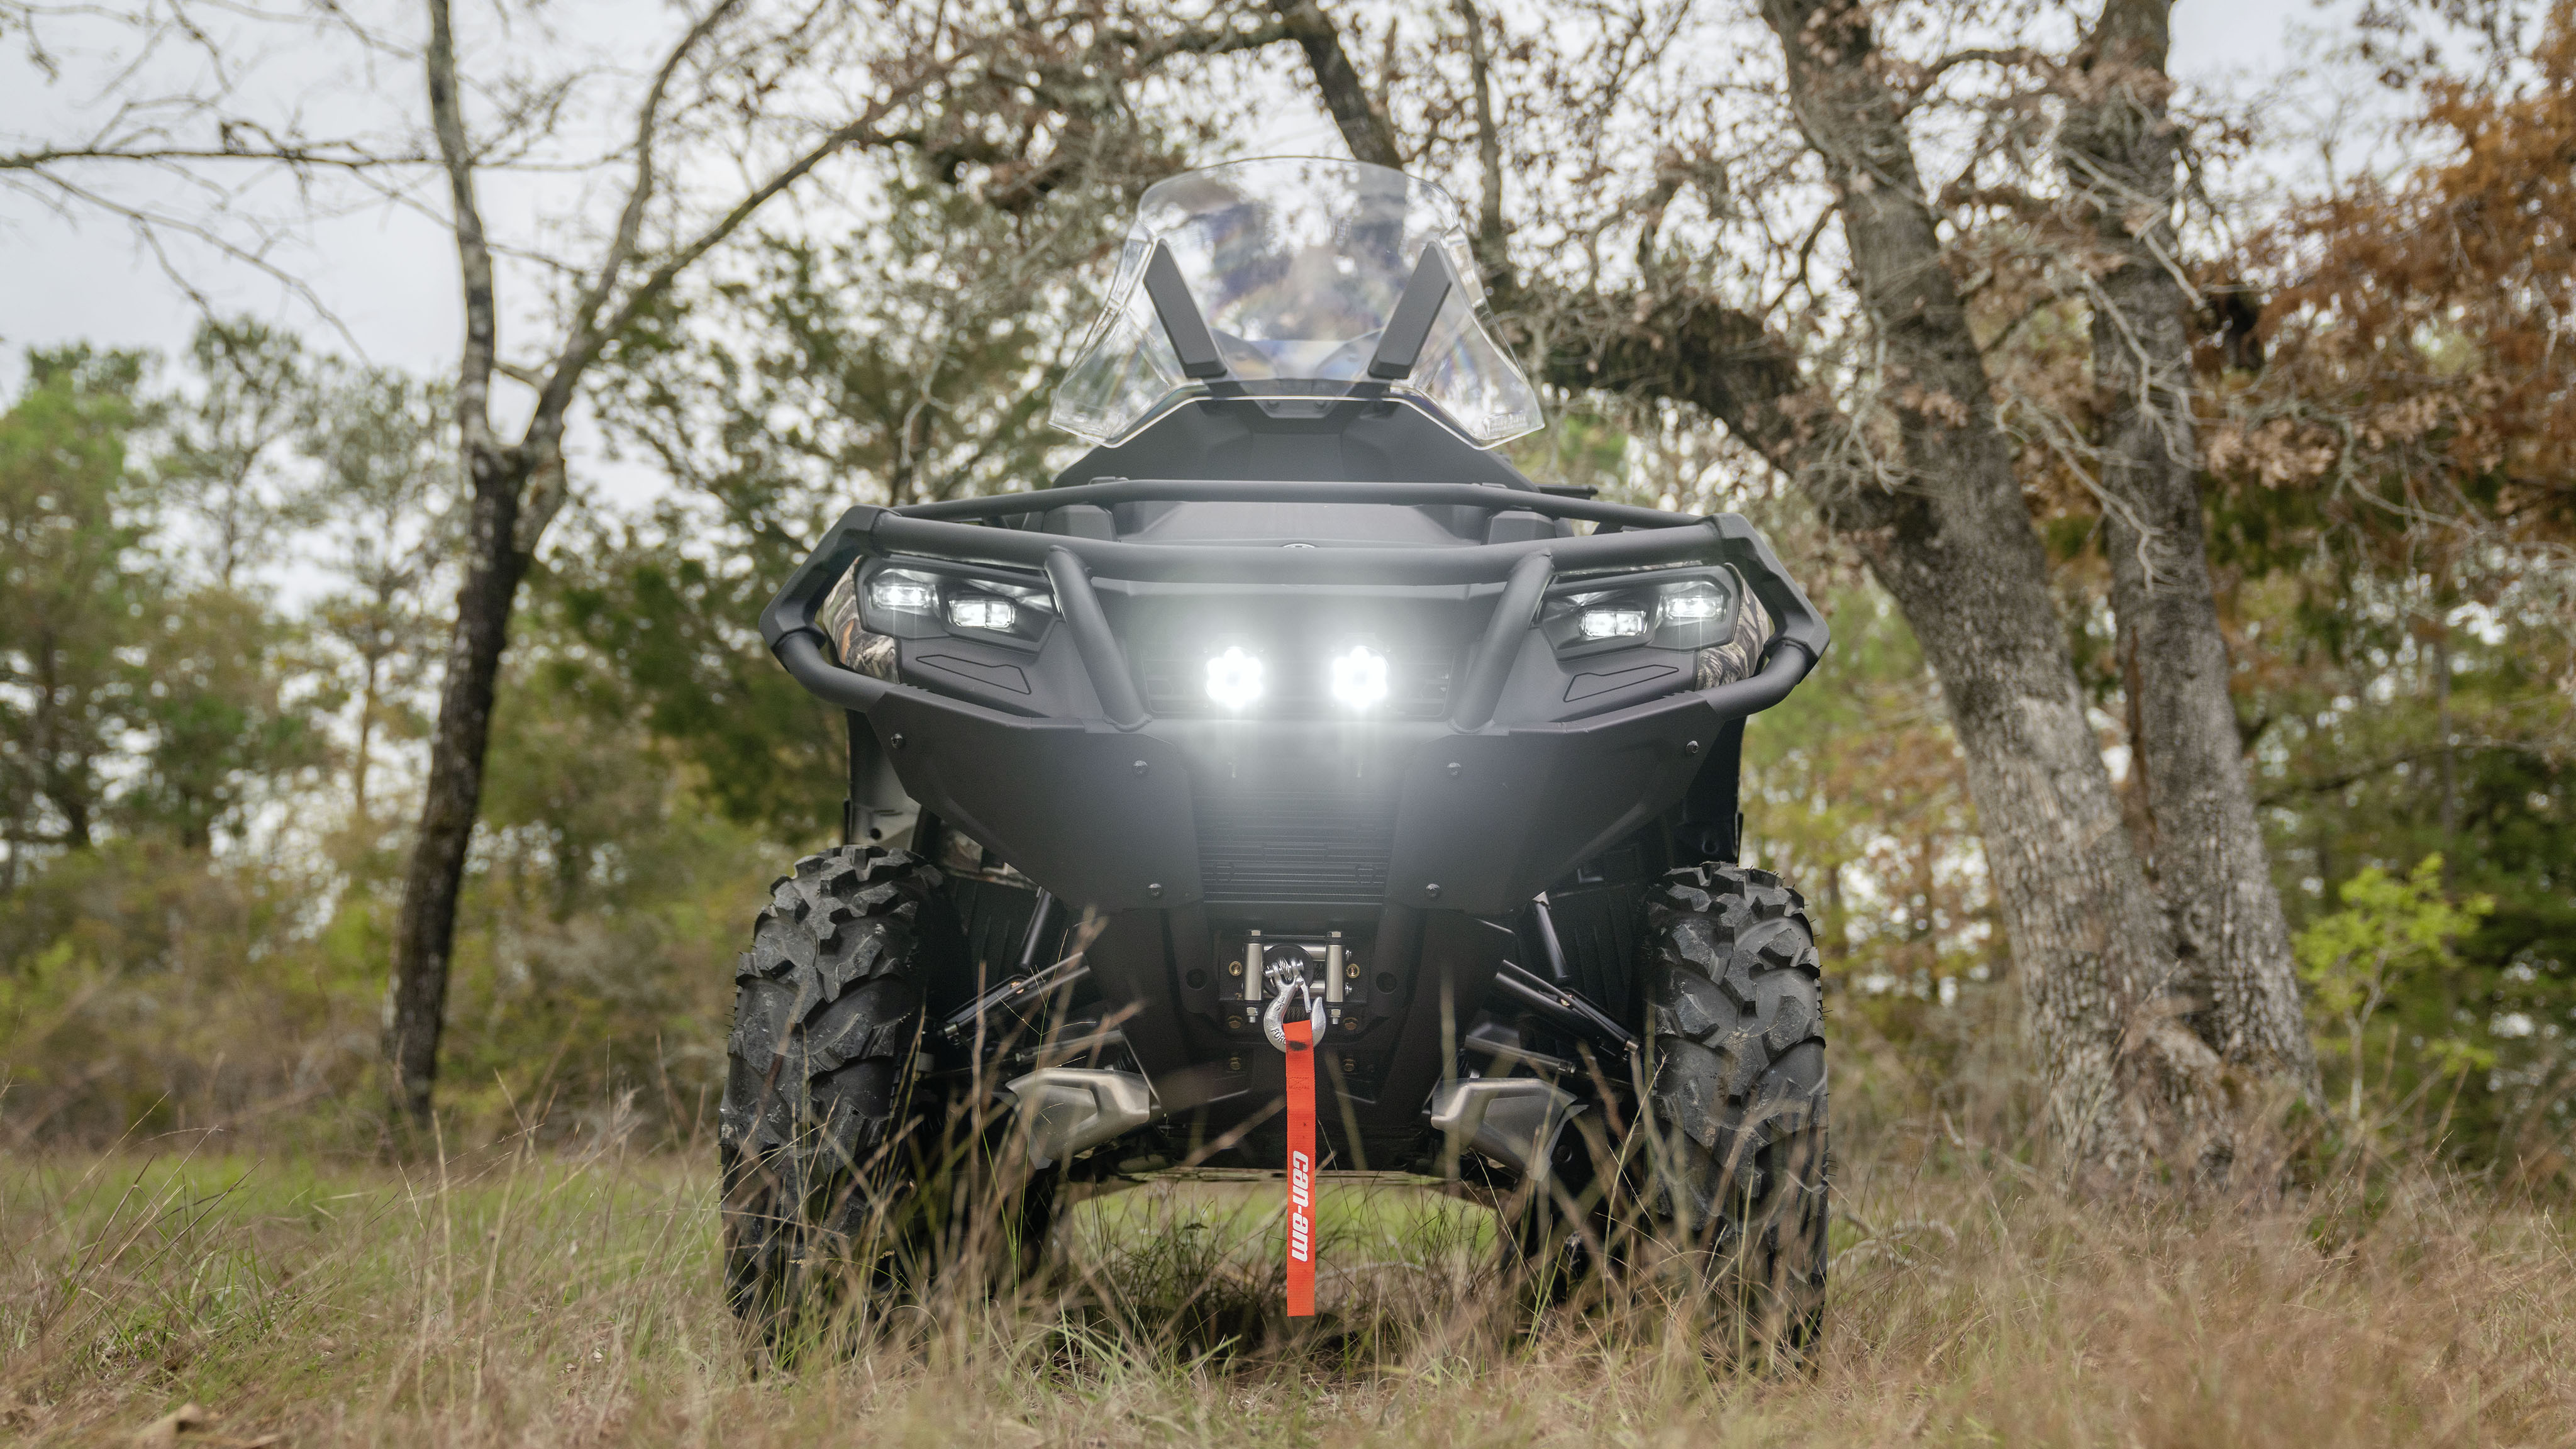 Front view of a Can-Am Outlander PRO Hunting Edition in a forest setting